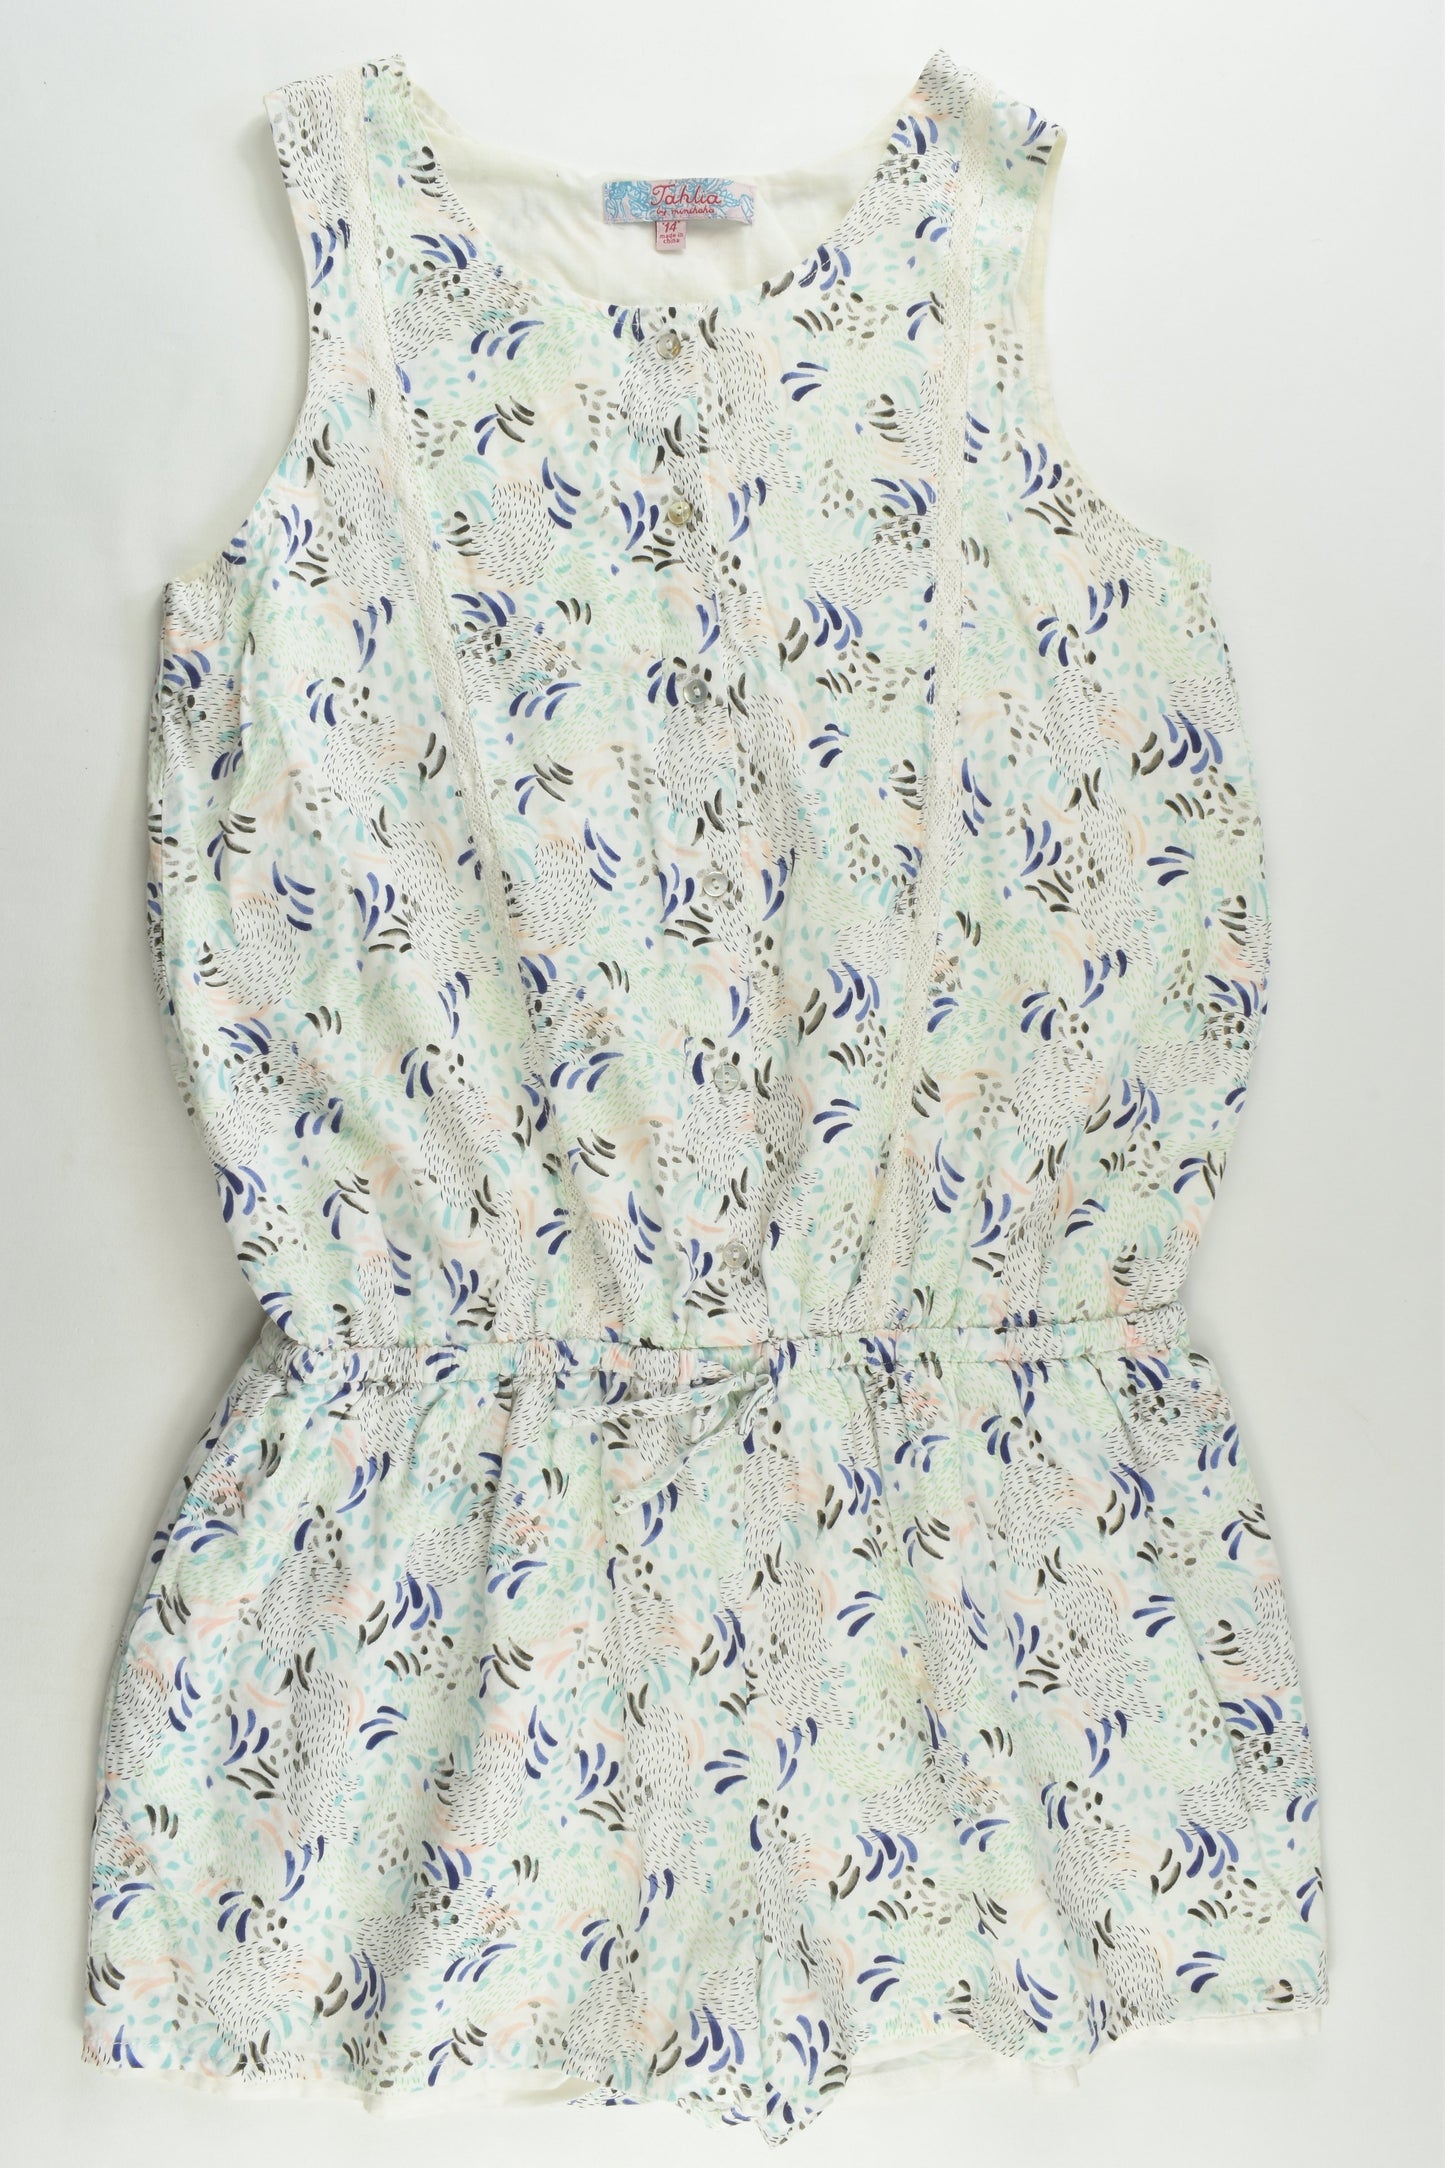 Tahlia by Minihaha Size 14 Fully Lined Playsuit